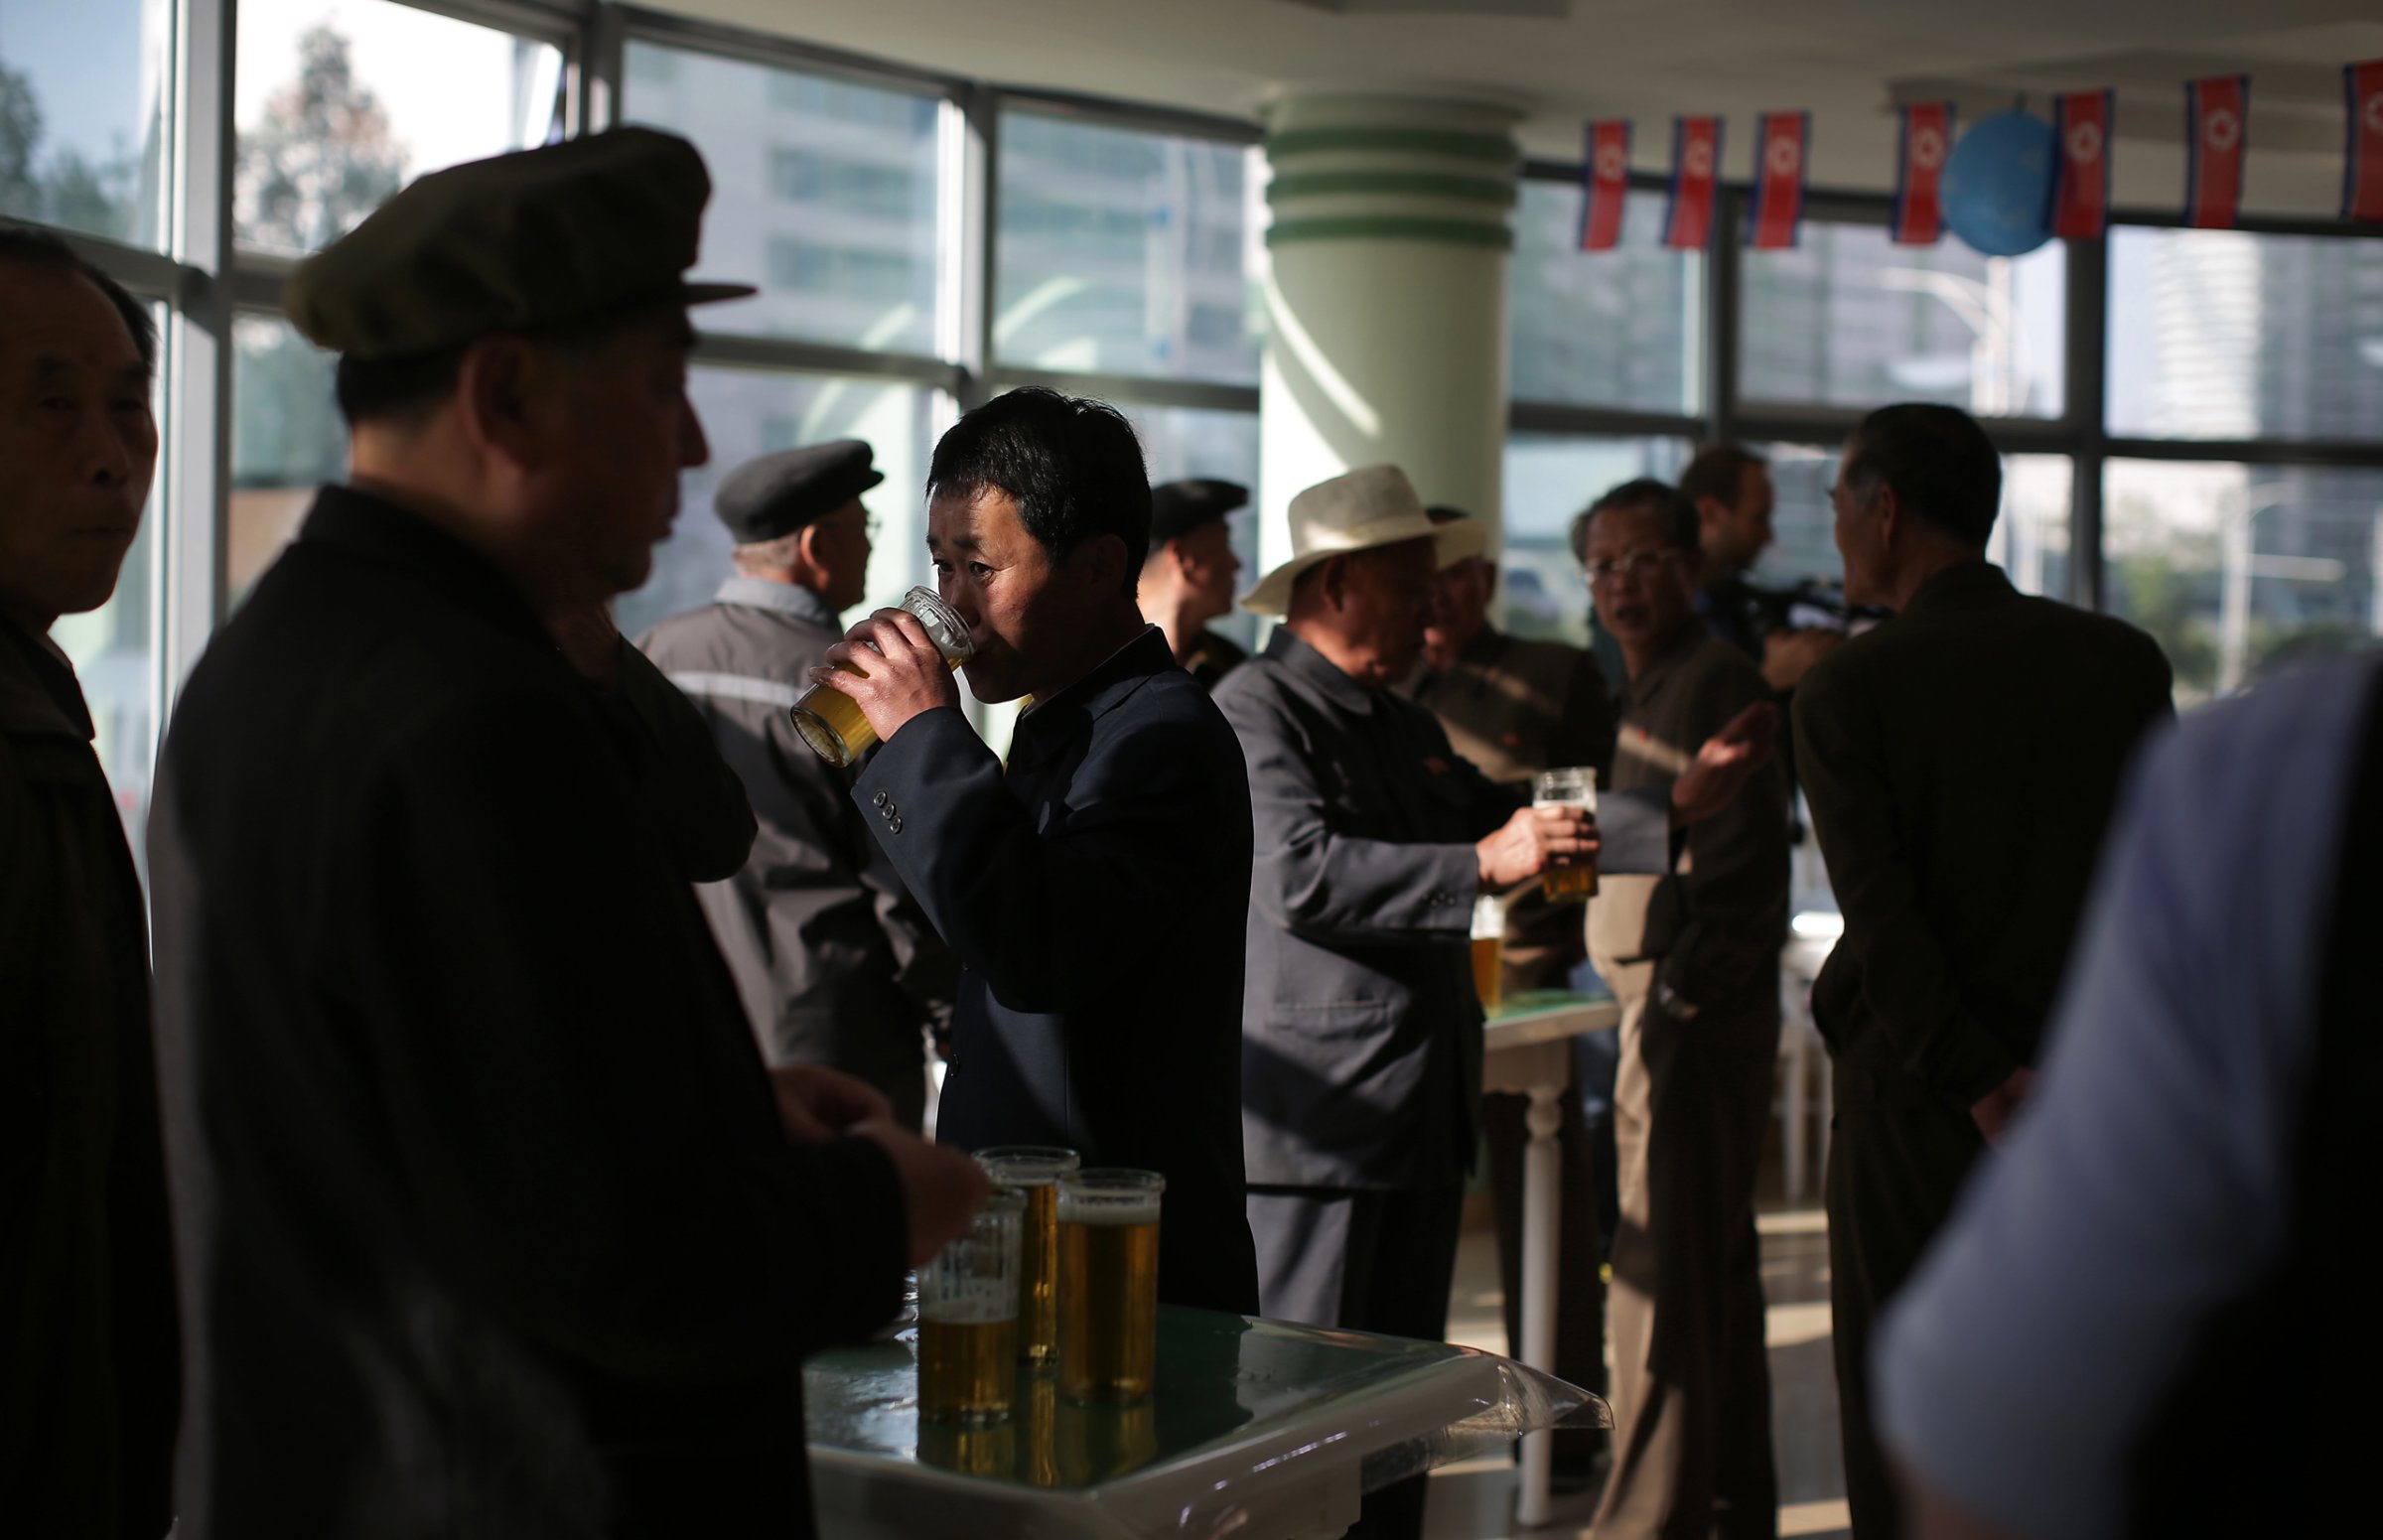 In this Saturday, May 7, 2016, photo, North Korean men drink beer at the Taedonggang Beer shop in Pyongyang, North Korea. Ahead of the ongoing congress of North Korea's ruling Workers' Party, the nation was called upon to do massive overtime to boost production and show their devotion to leader Kim Jong Un in a 70-day "loyalty campaign." And that's in addition to the hour after hour of rehearsals for huge rallies when their ruling party wraps up its first congress in decades. So how does a tired North Korean unwind? Beer. Beer. And more beer. (AP Photo/Wong Maye-E)